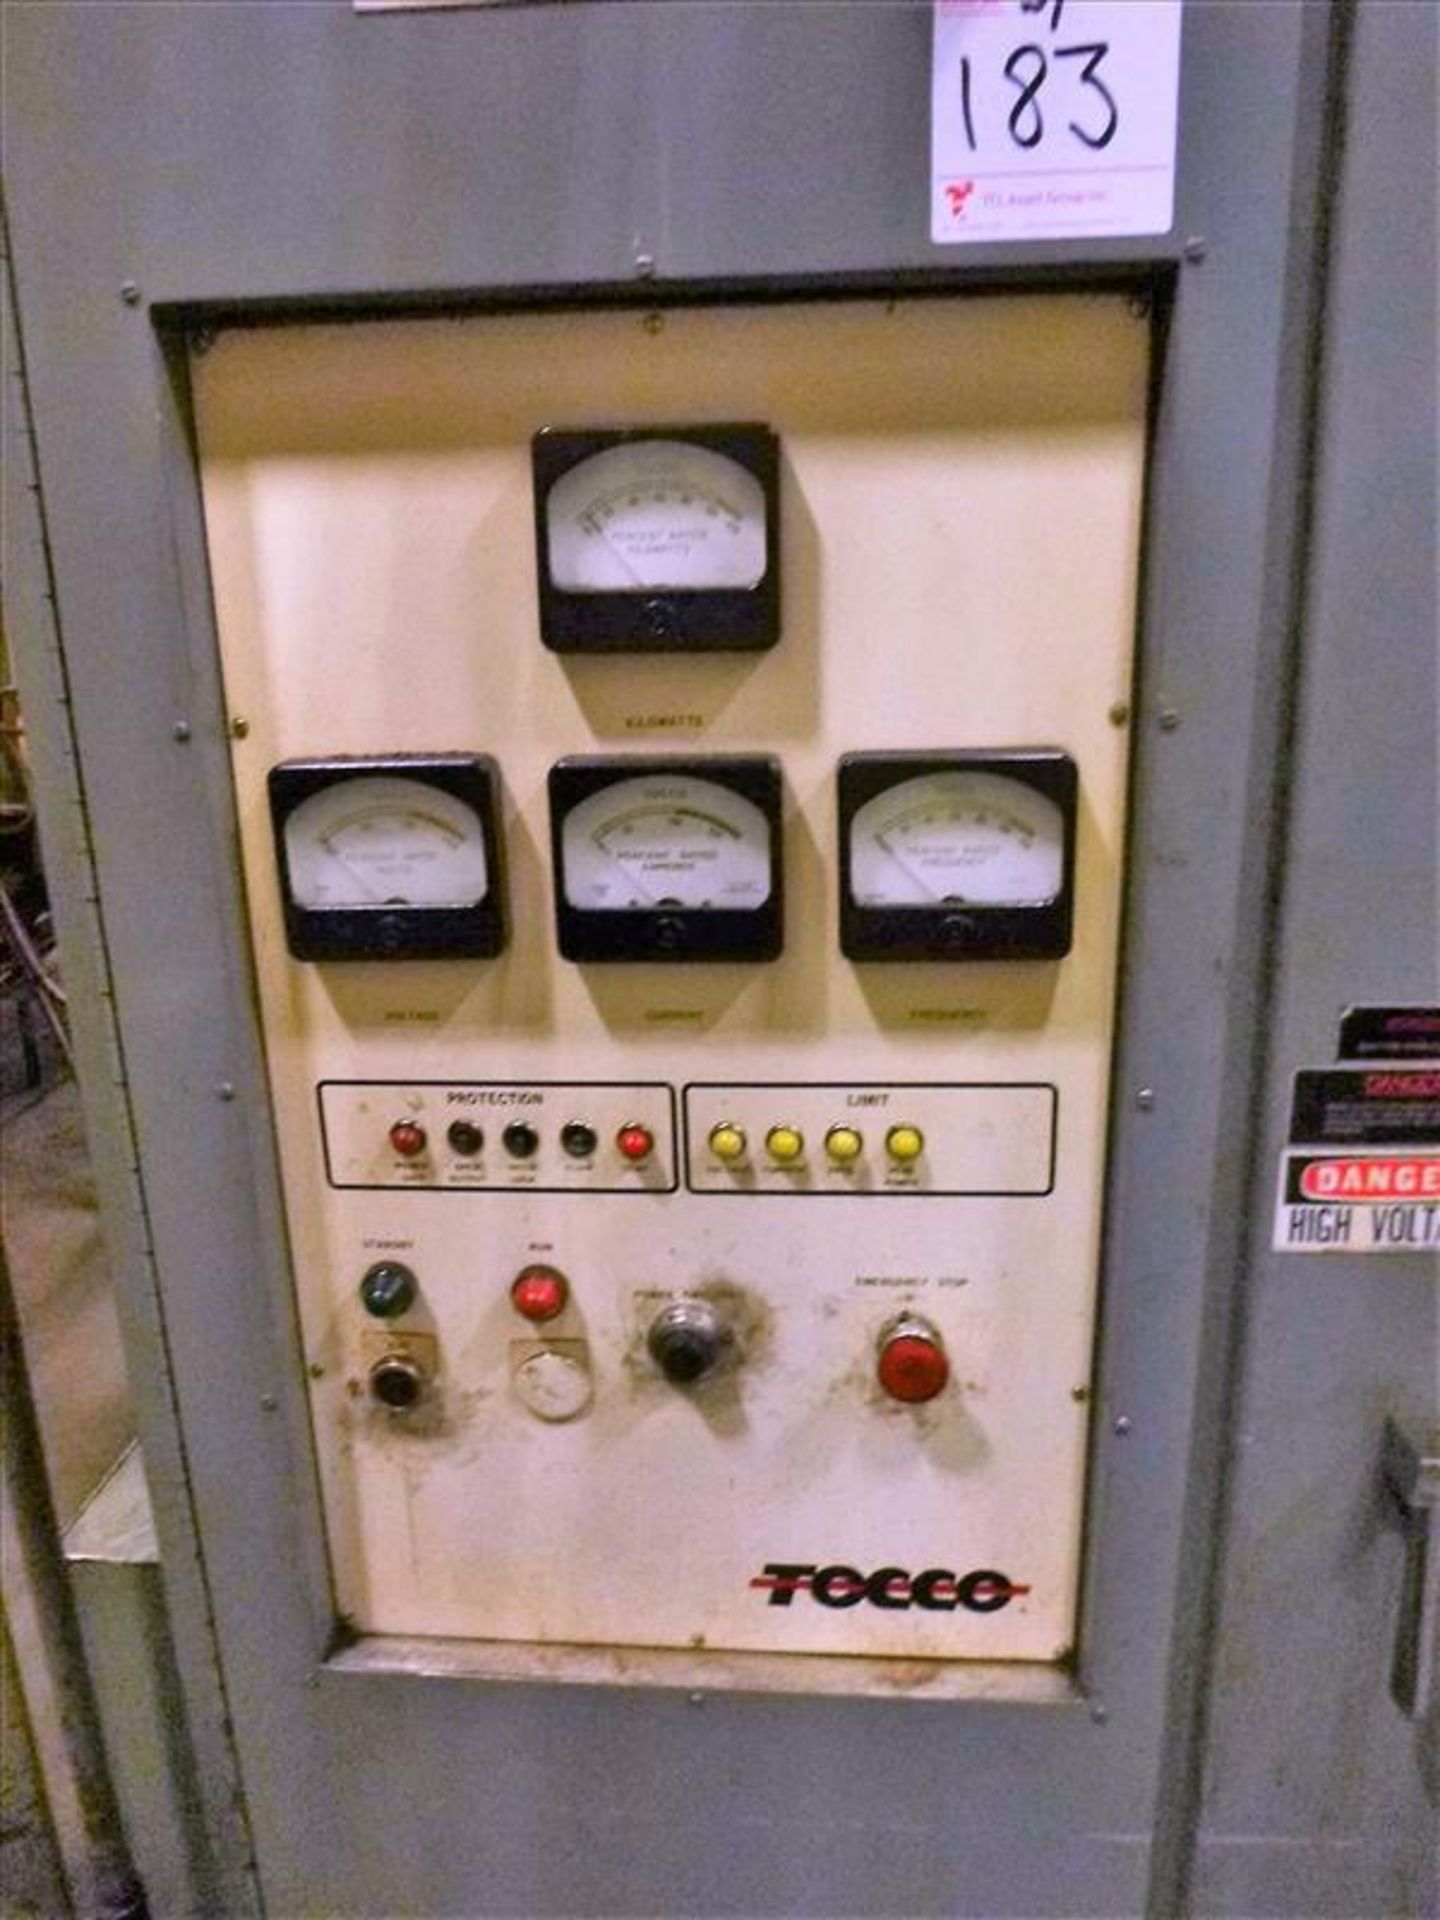 TOCCO Tempering Unit w/ INDUCTRON 100-3T-02 100 kw, s/n 12-8313-11 c/w Distilled Water Cooling/ - Image 10 of 20